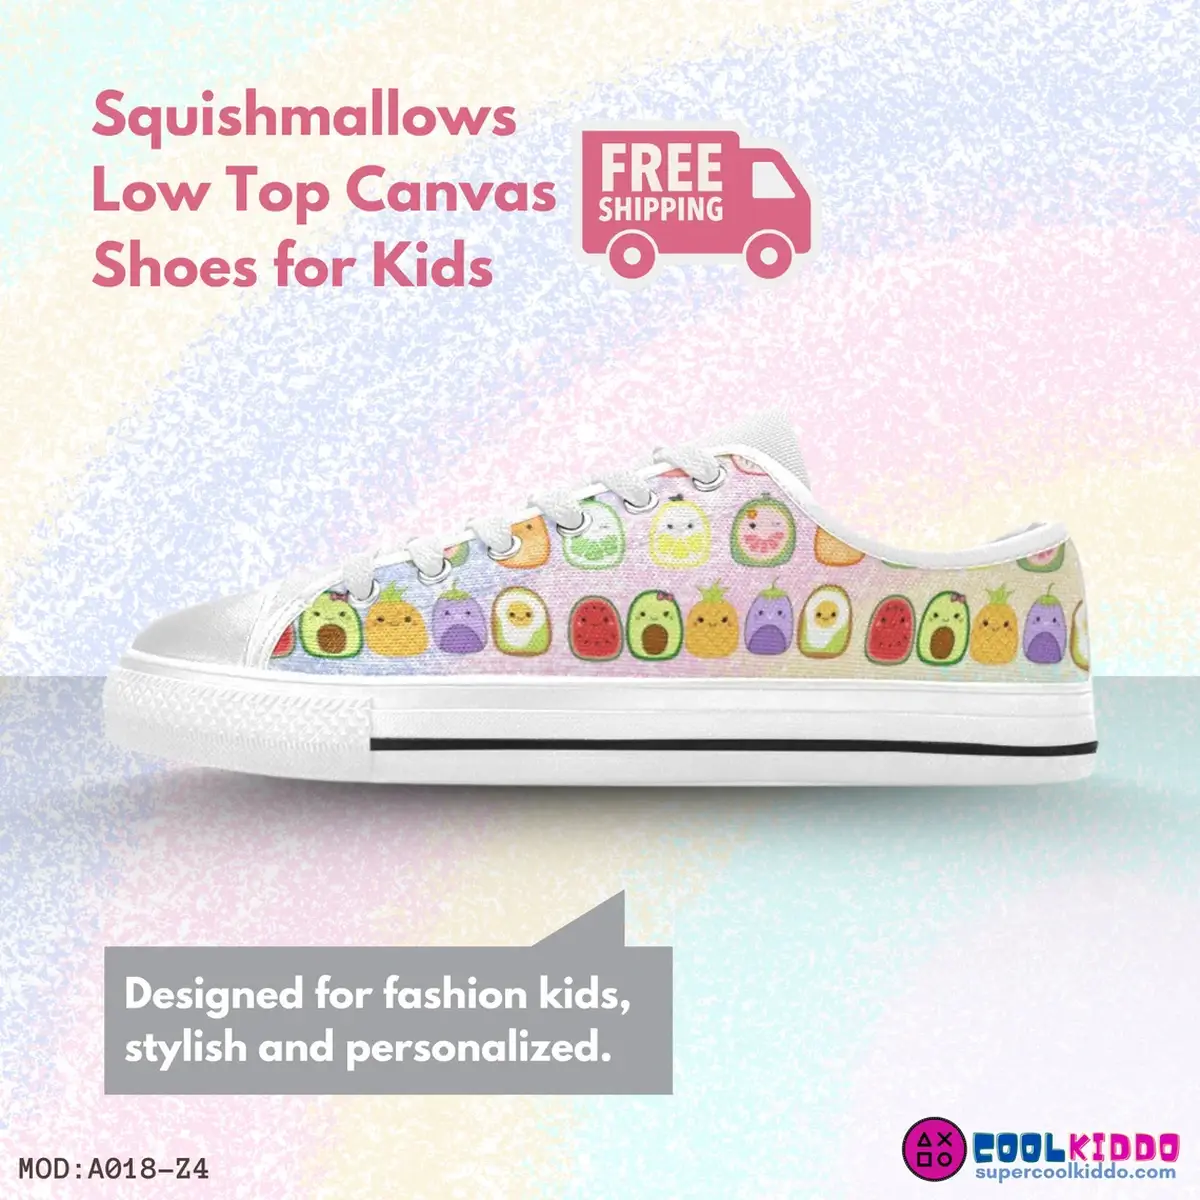 Squishmallow food shoes for kids squishmallow, Low top canvas shoes for kids Cool Kiddo 20